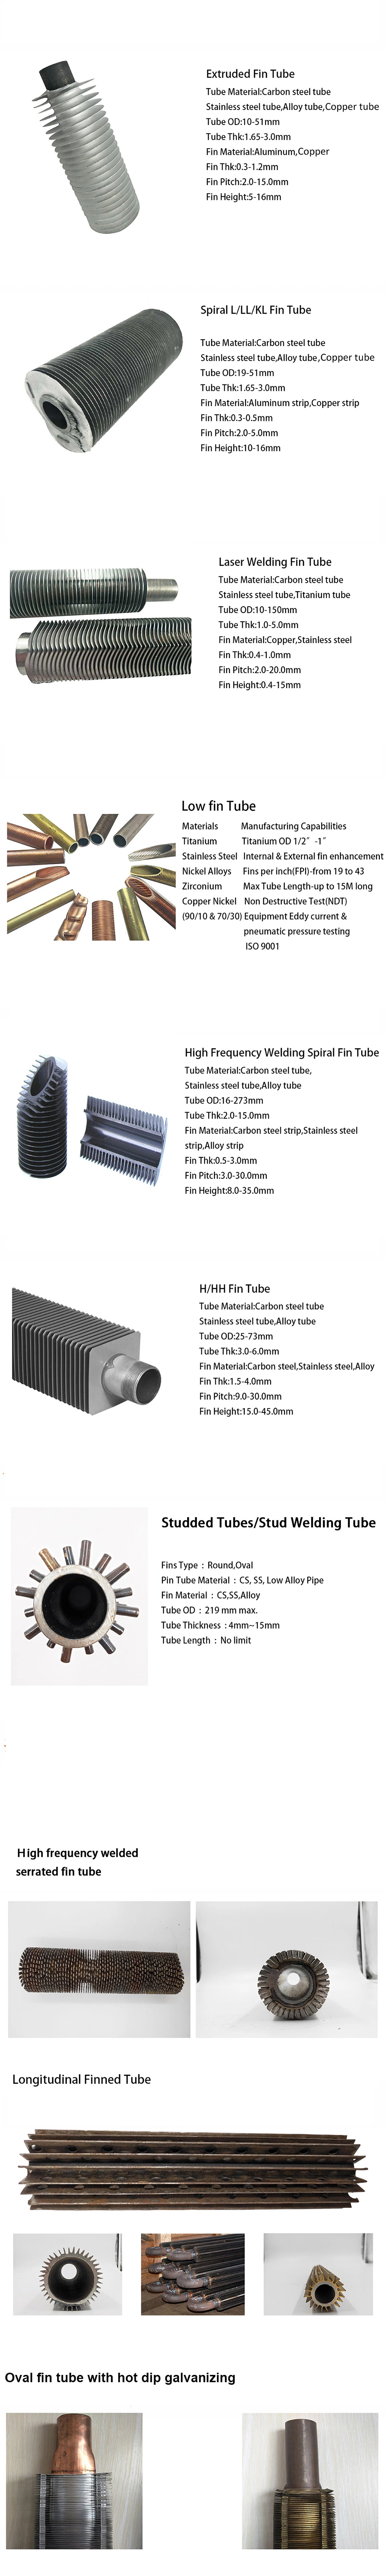 China Factory Price High Quality Frequency Industrial Refrigeration & Stainless Steel Welded Helical Extruded Spiral Fin/Finned Plate Brazed Heat Exchanger Tube